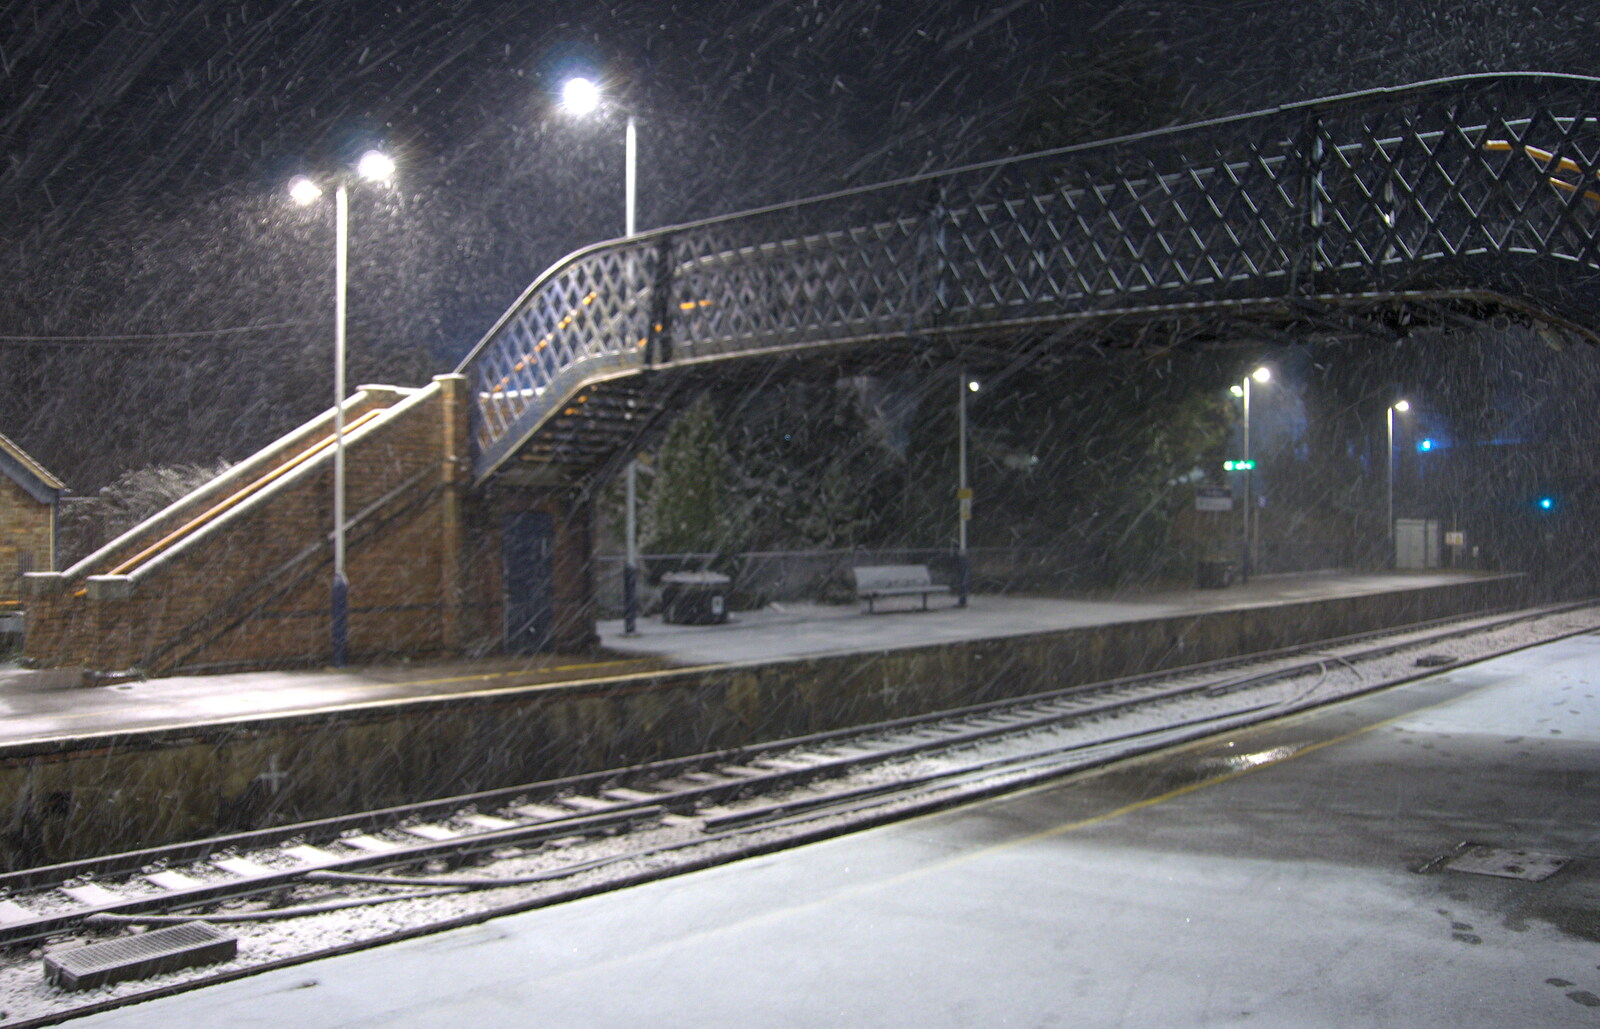 Snow comes down on the footbridge at New Milton from A Wintry Trip Down South, Walkford, Dorset - 1st February 2019